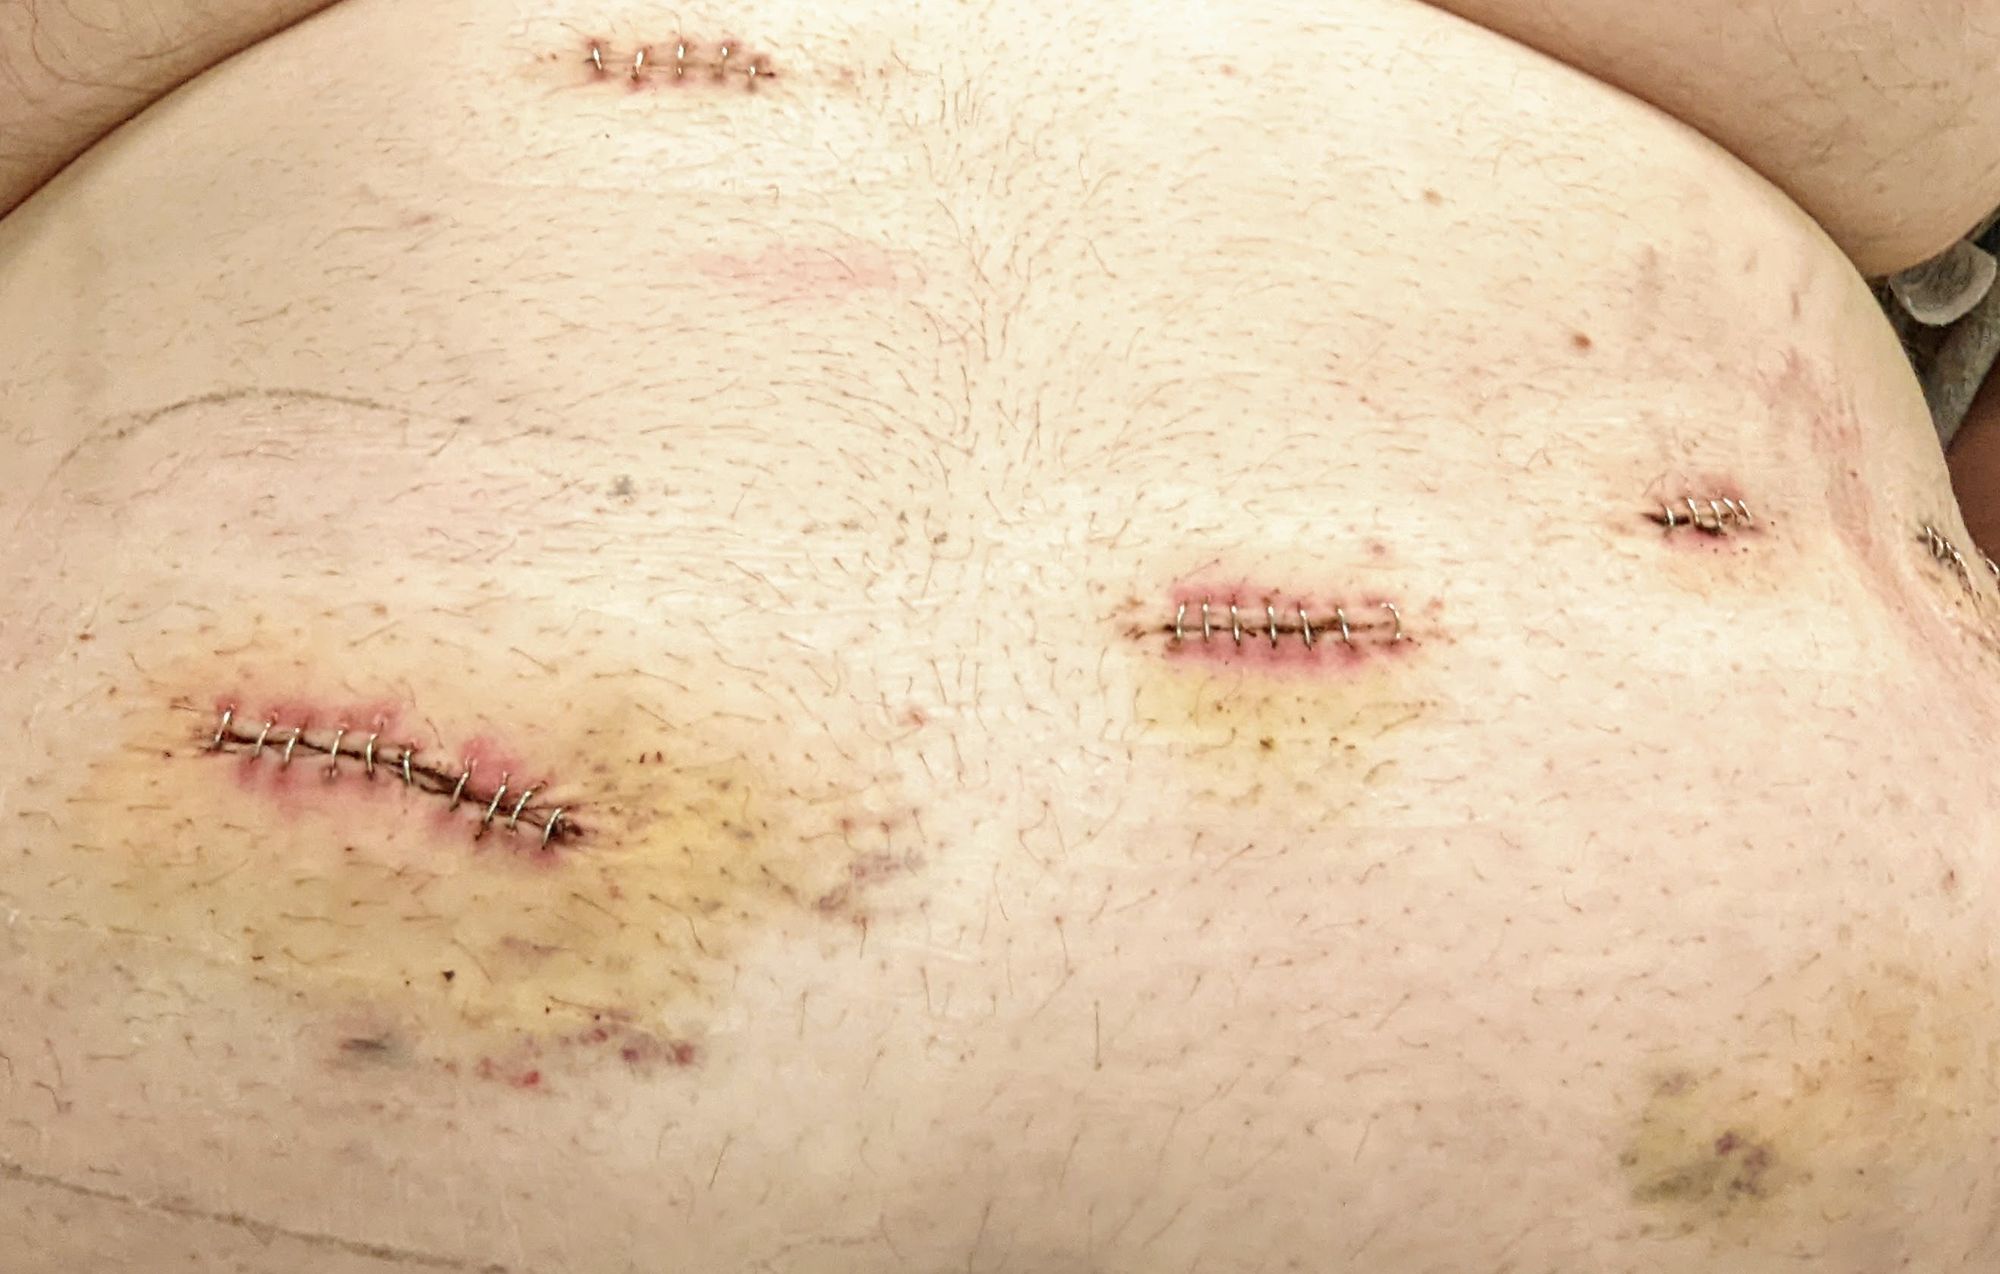 One month post-surgery blues